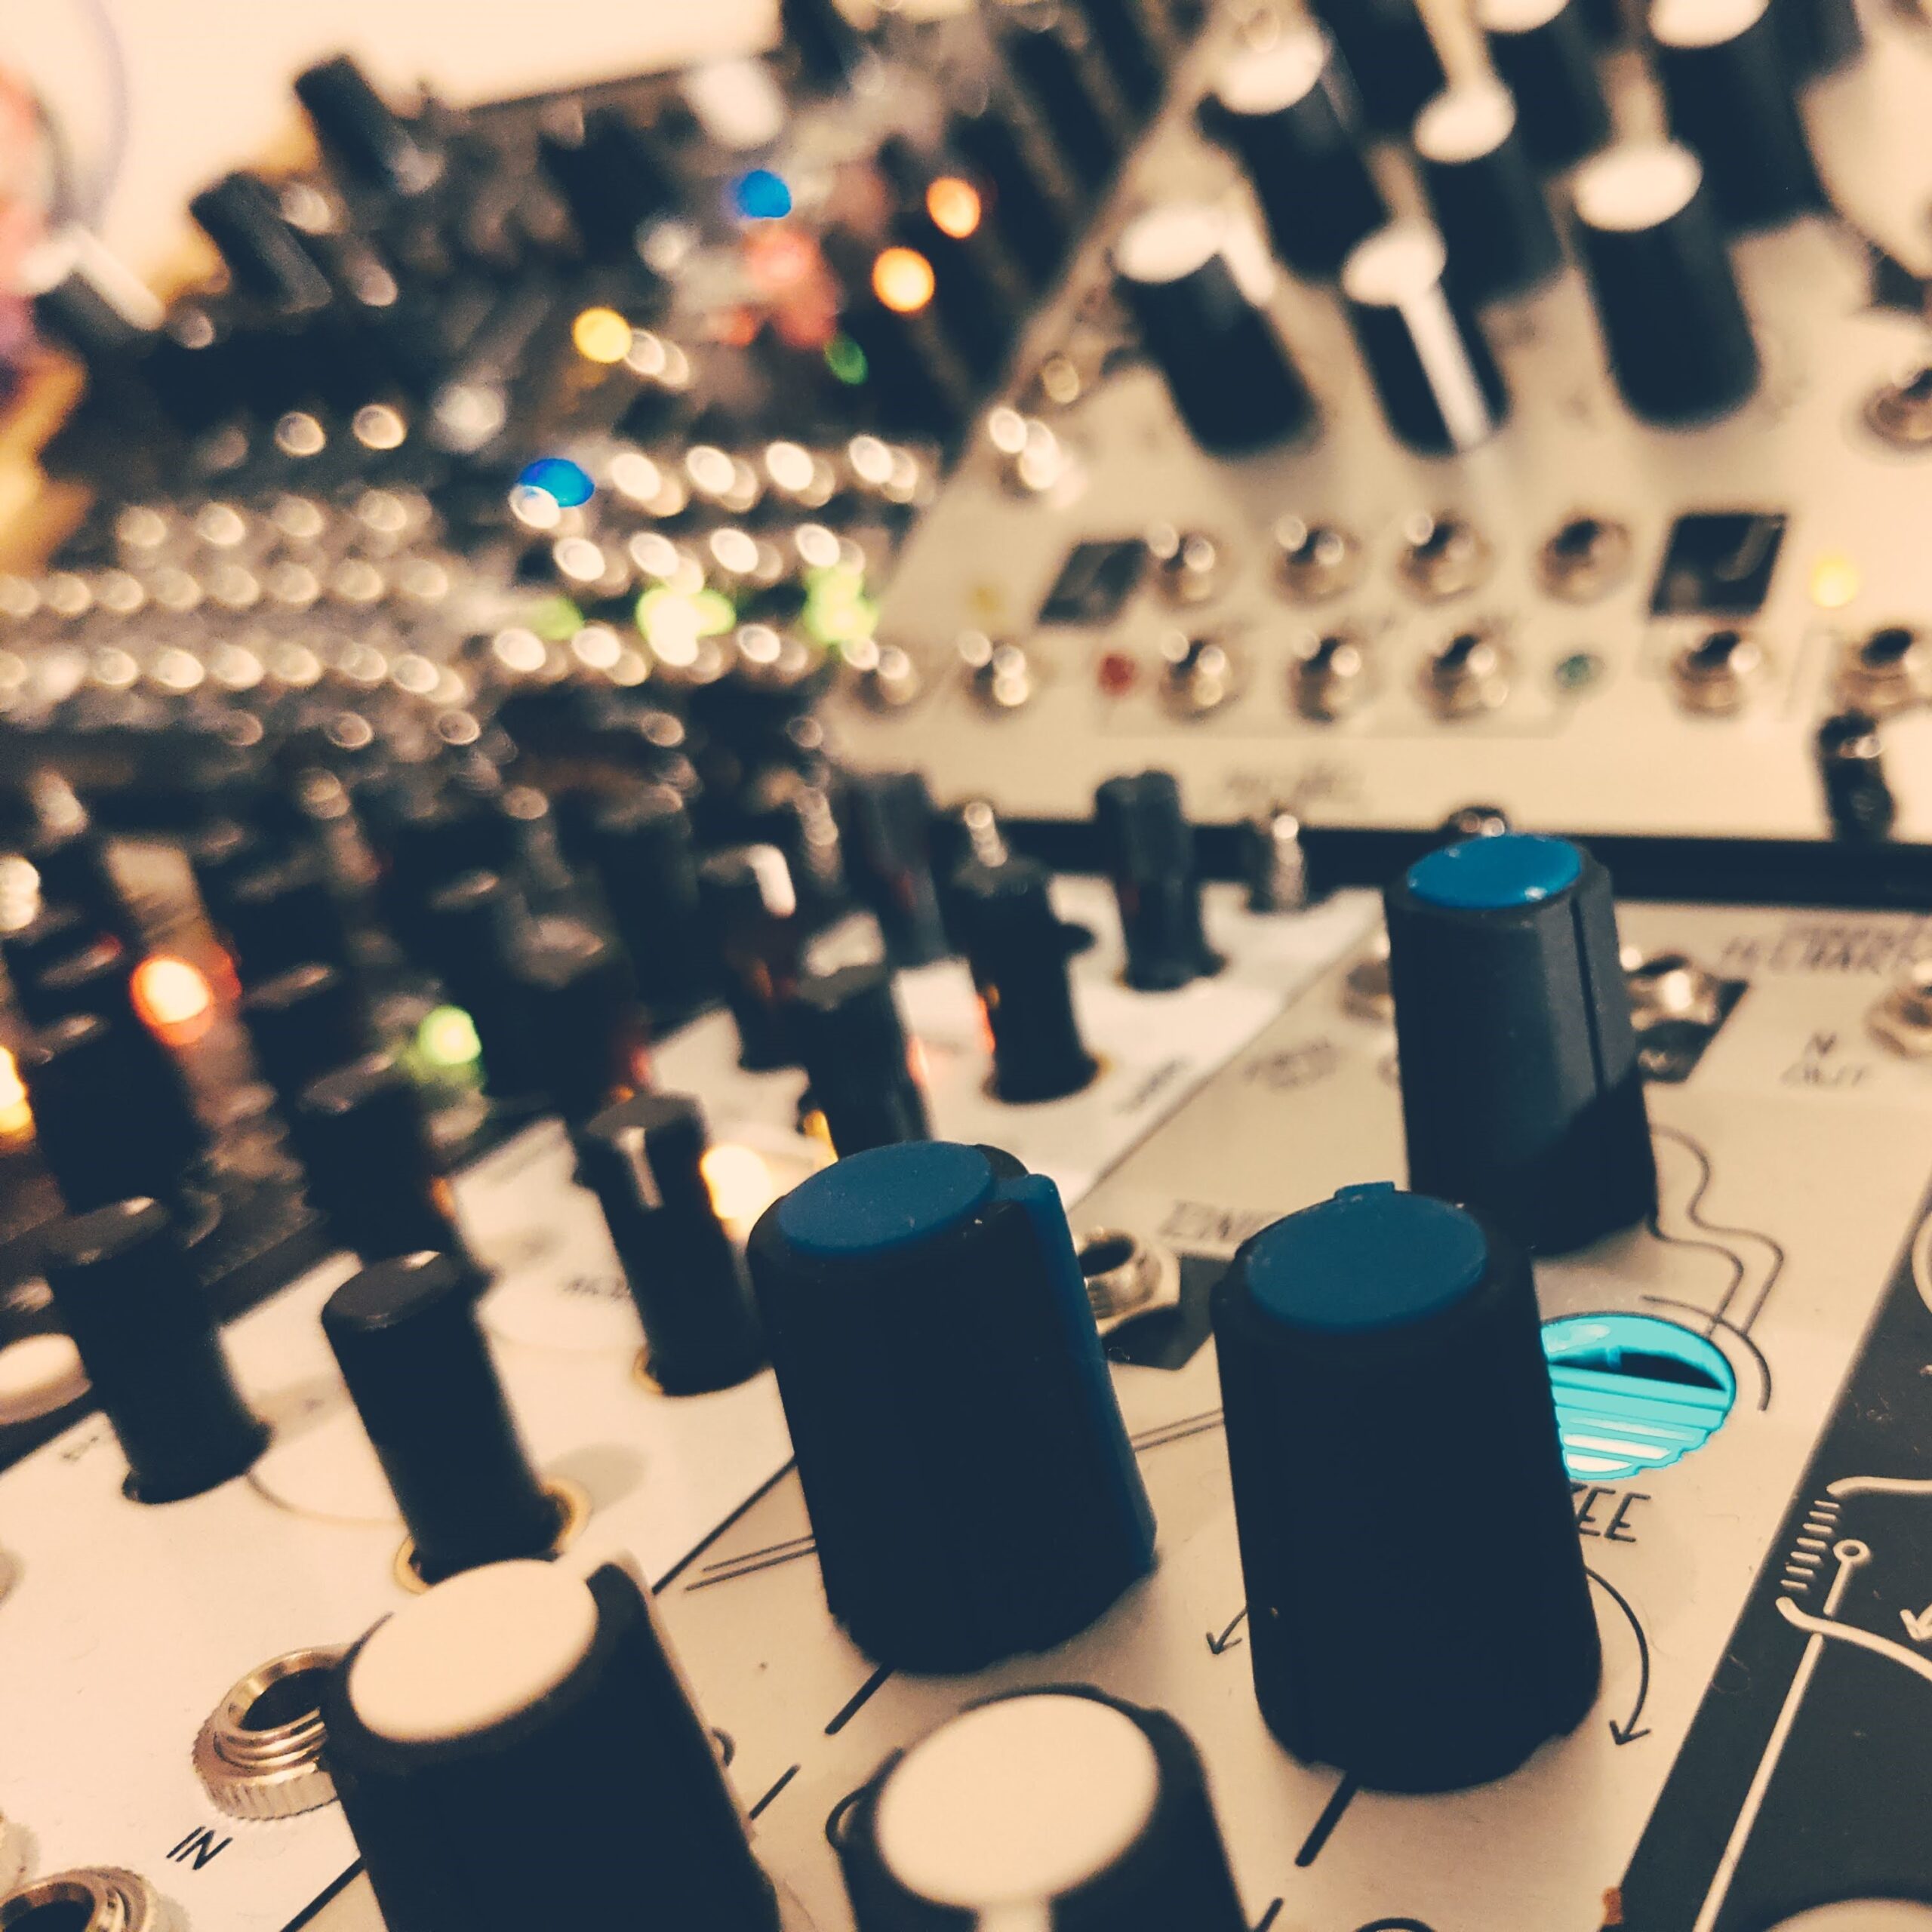 Discover the limitless possibility of modular synthesis Explore the fundamentals of modular synthesis with my introductory course. Learn the basics of patching, signal flow, and creating unique sounds. £250